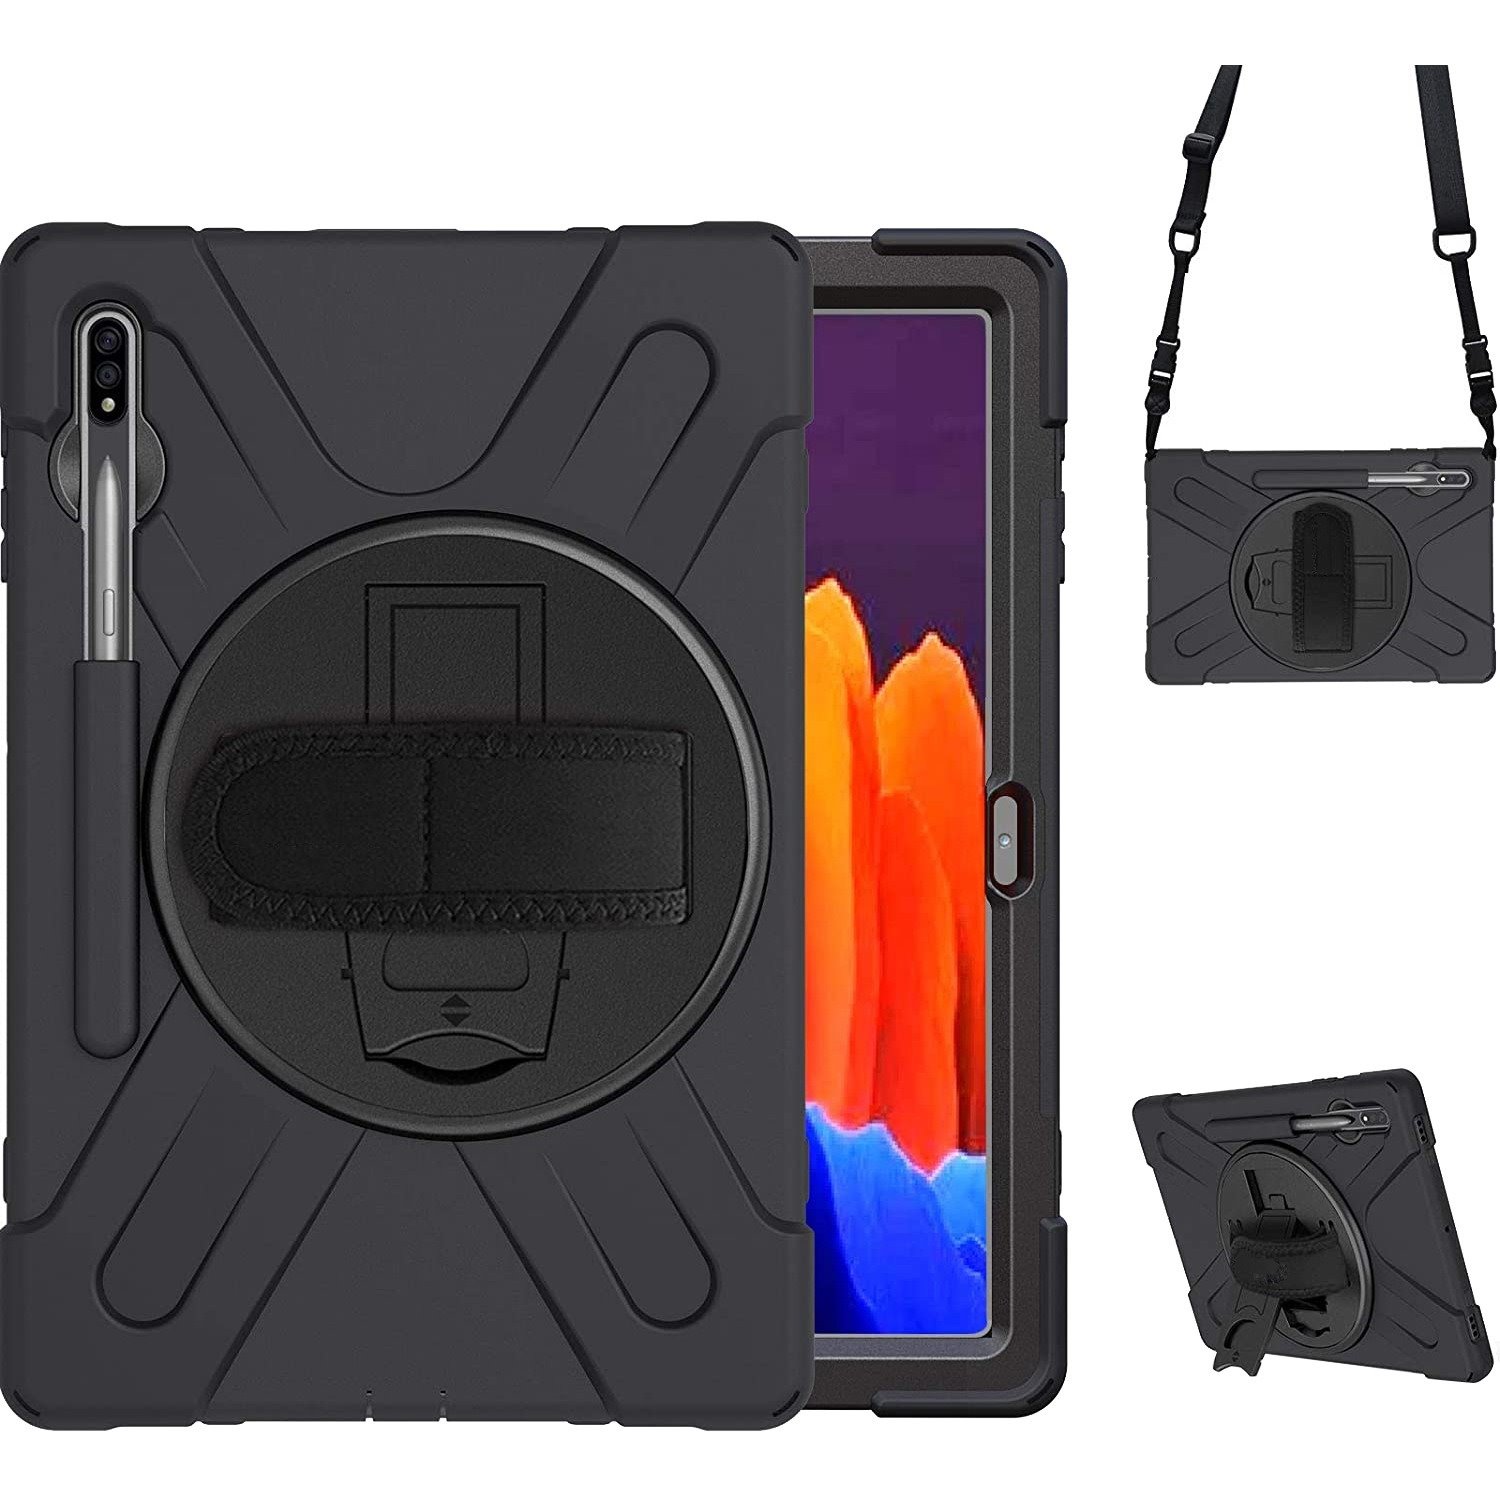 Codi Rugged Rugged Carrying Case for 11" Samsung Galaxy Tab S7 Tablet - Black